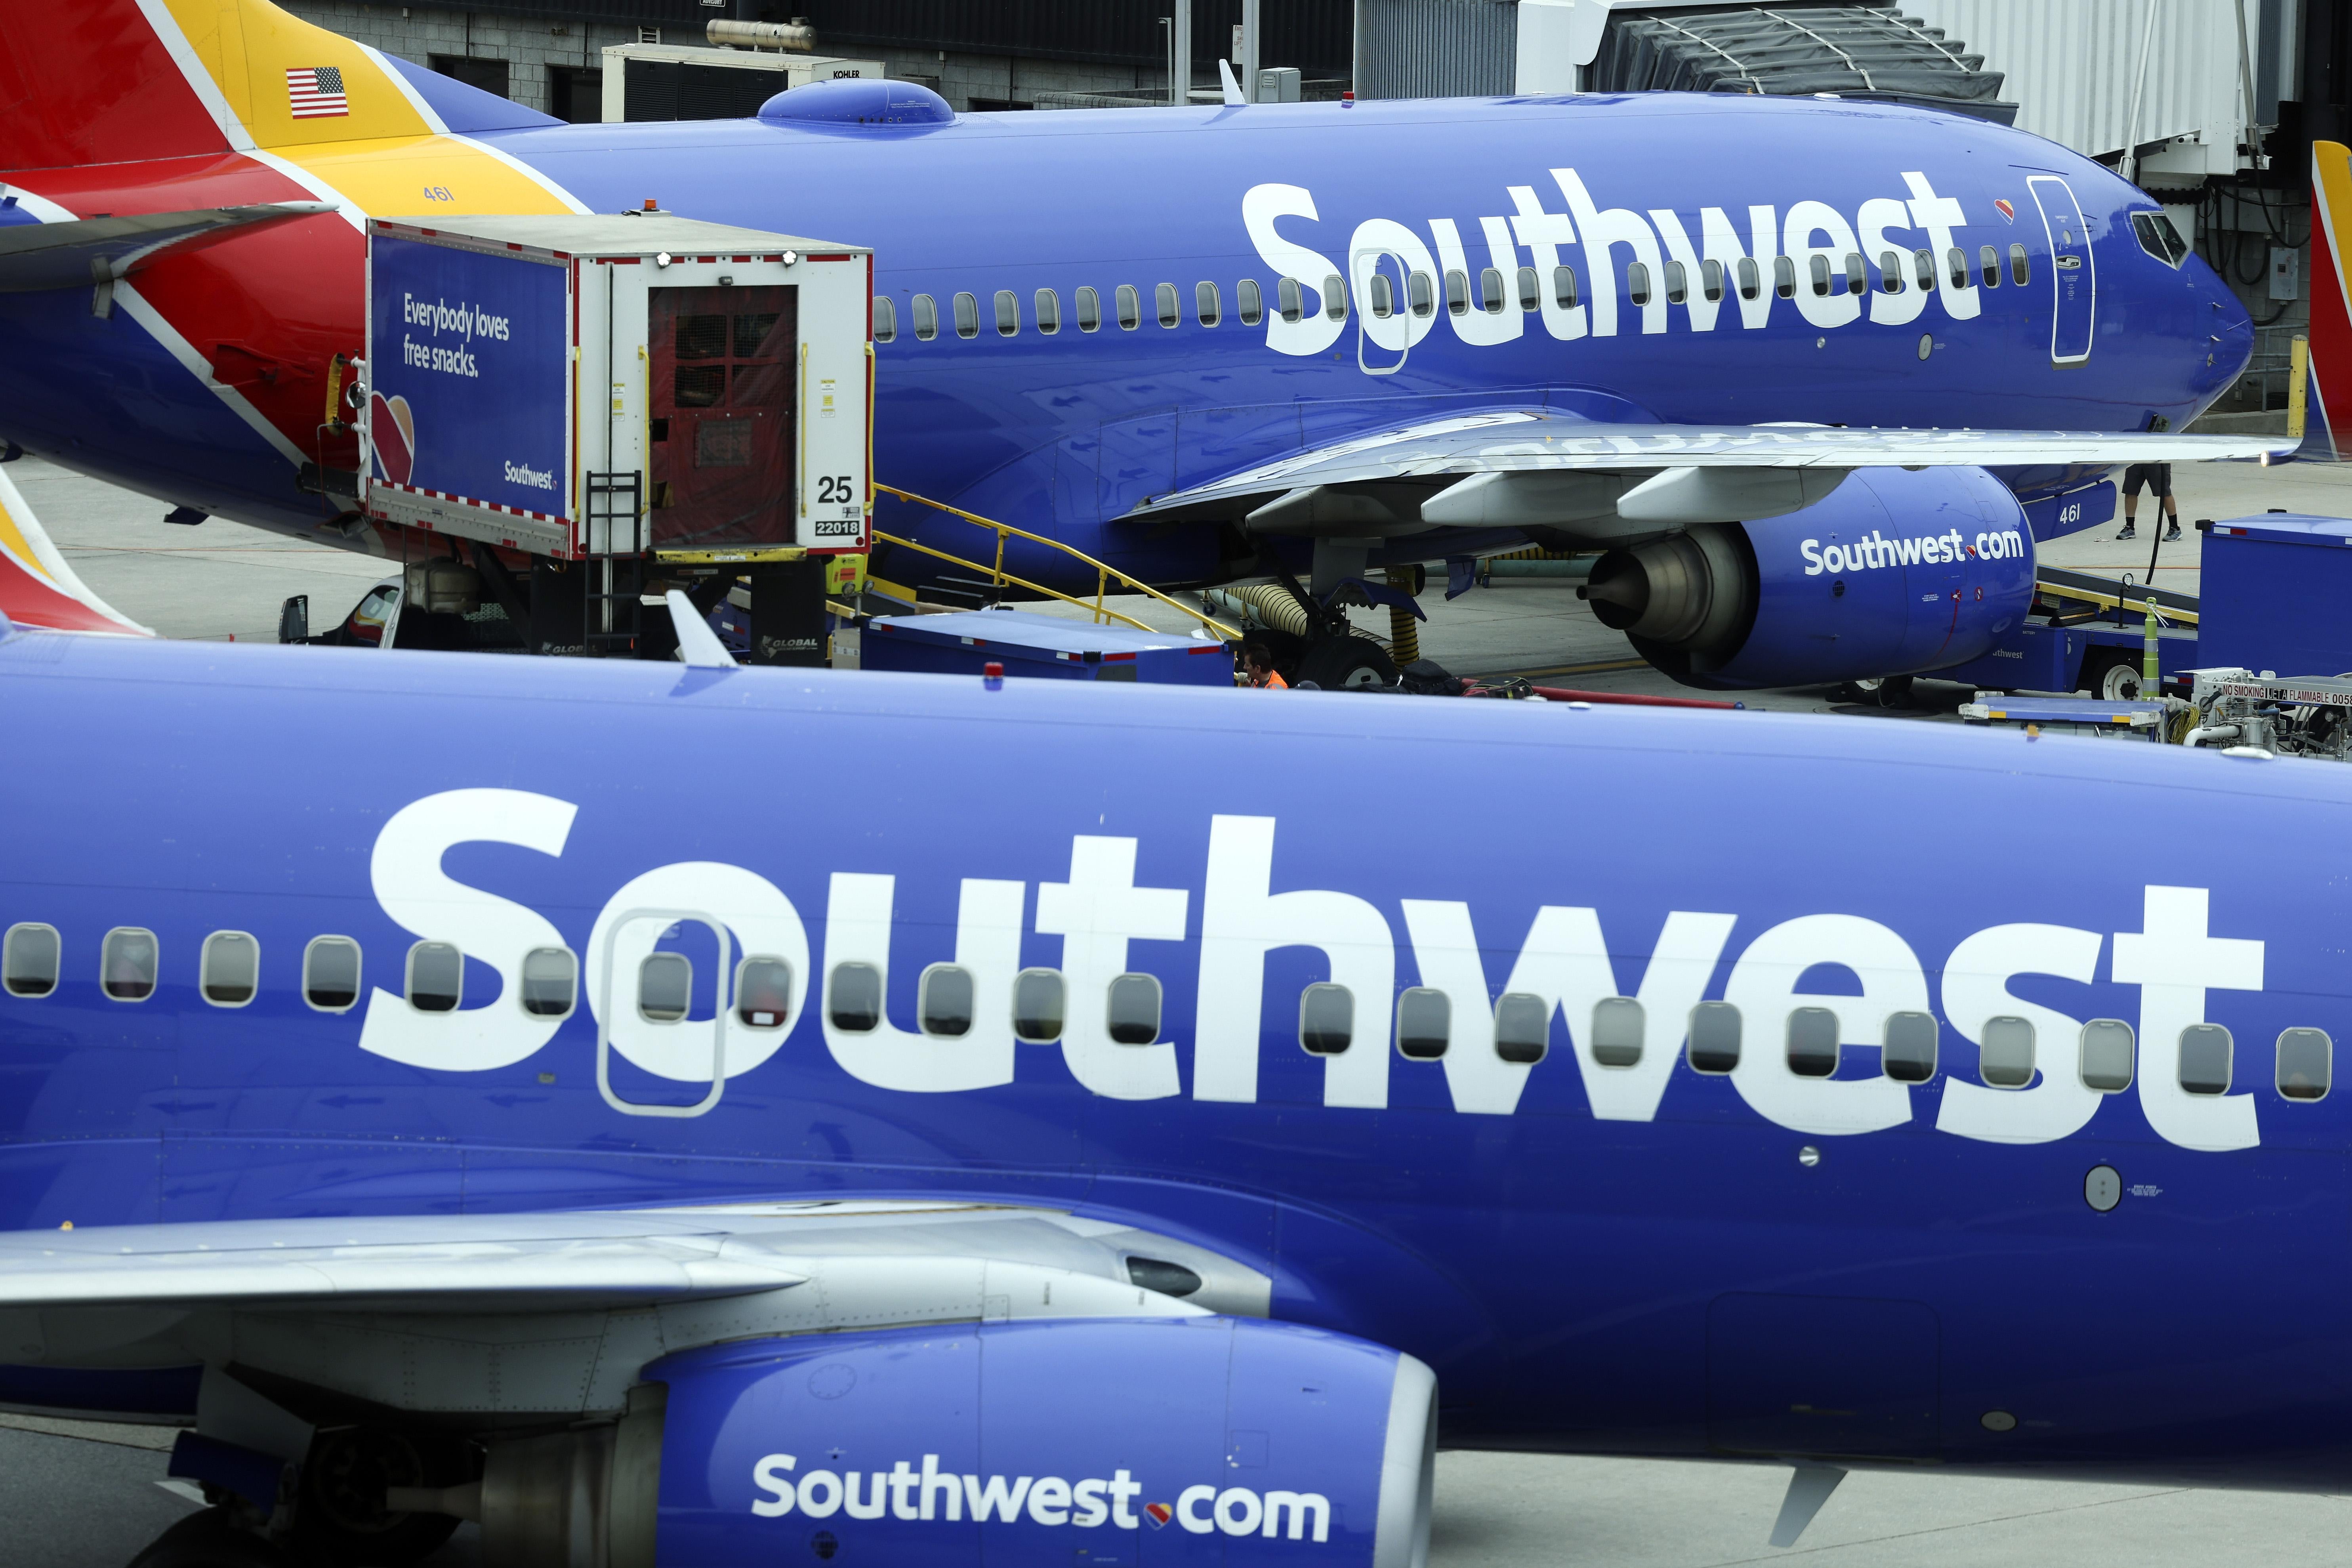 Two Southwest planes at a gate